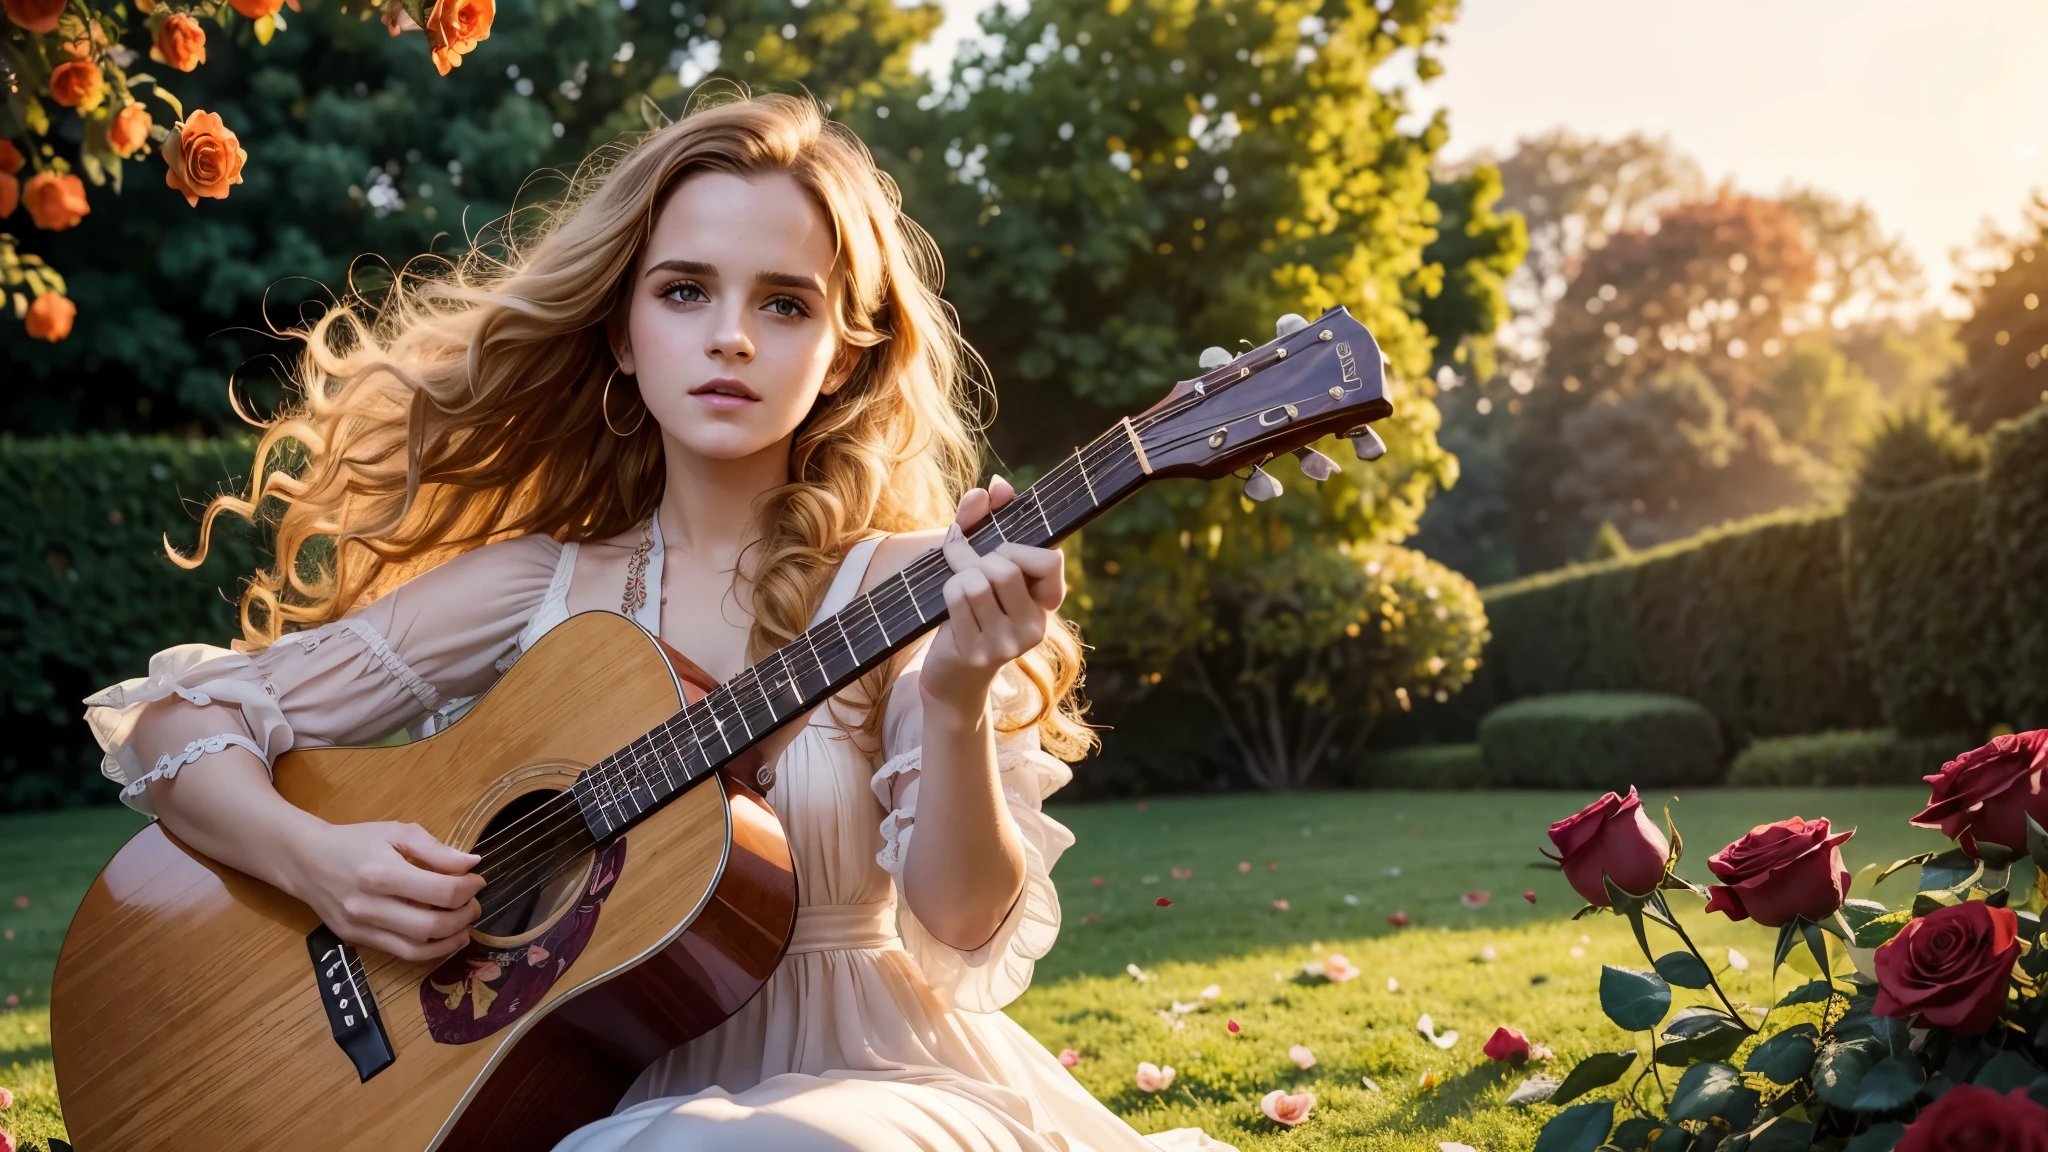 ((best quality)), ((masterpiece)),(detail), perfect face, full body shot of emma watson playing guitar in the middle of a blooming rose garden, rose petals flying across the sky, woman wearing a silk dress, woman woman with blonde and curly hair, beautiful long curly hair, with setting sun, romantic style, retro vintage and romanticism, blurred background image, sunset light, golden sunshine, roses, very lots of flying flower petals, rose petals stuck in hair, warm orange background color, subject takes up 1/3 of the frame, hyper-realistic photos, 8k, ultra high resolution, sharp faces